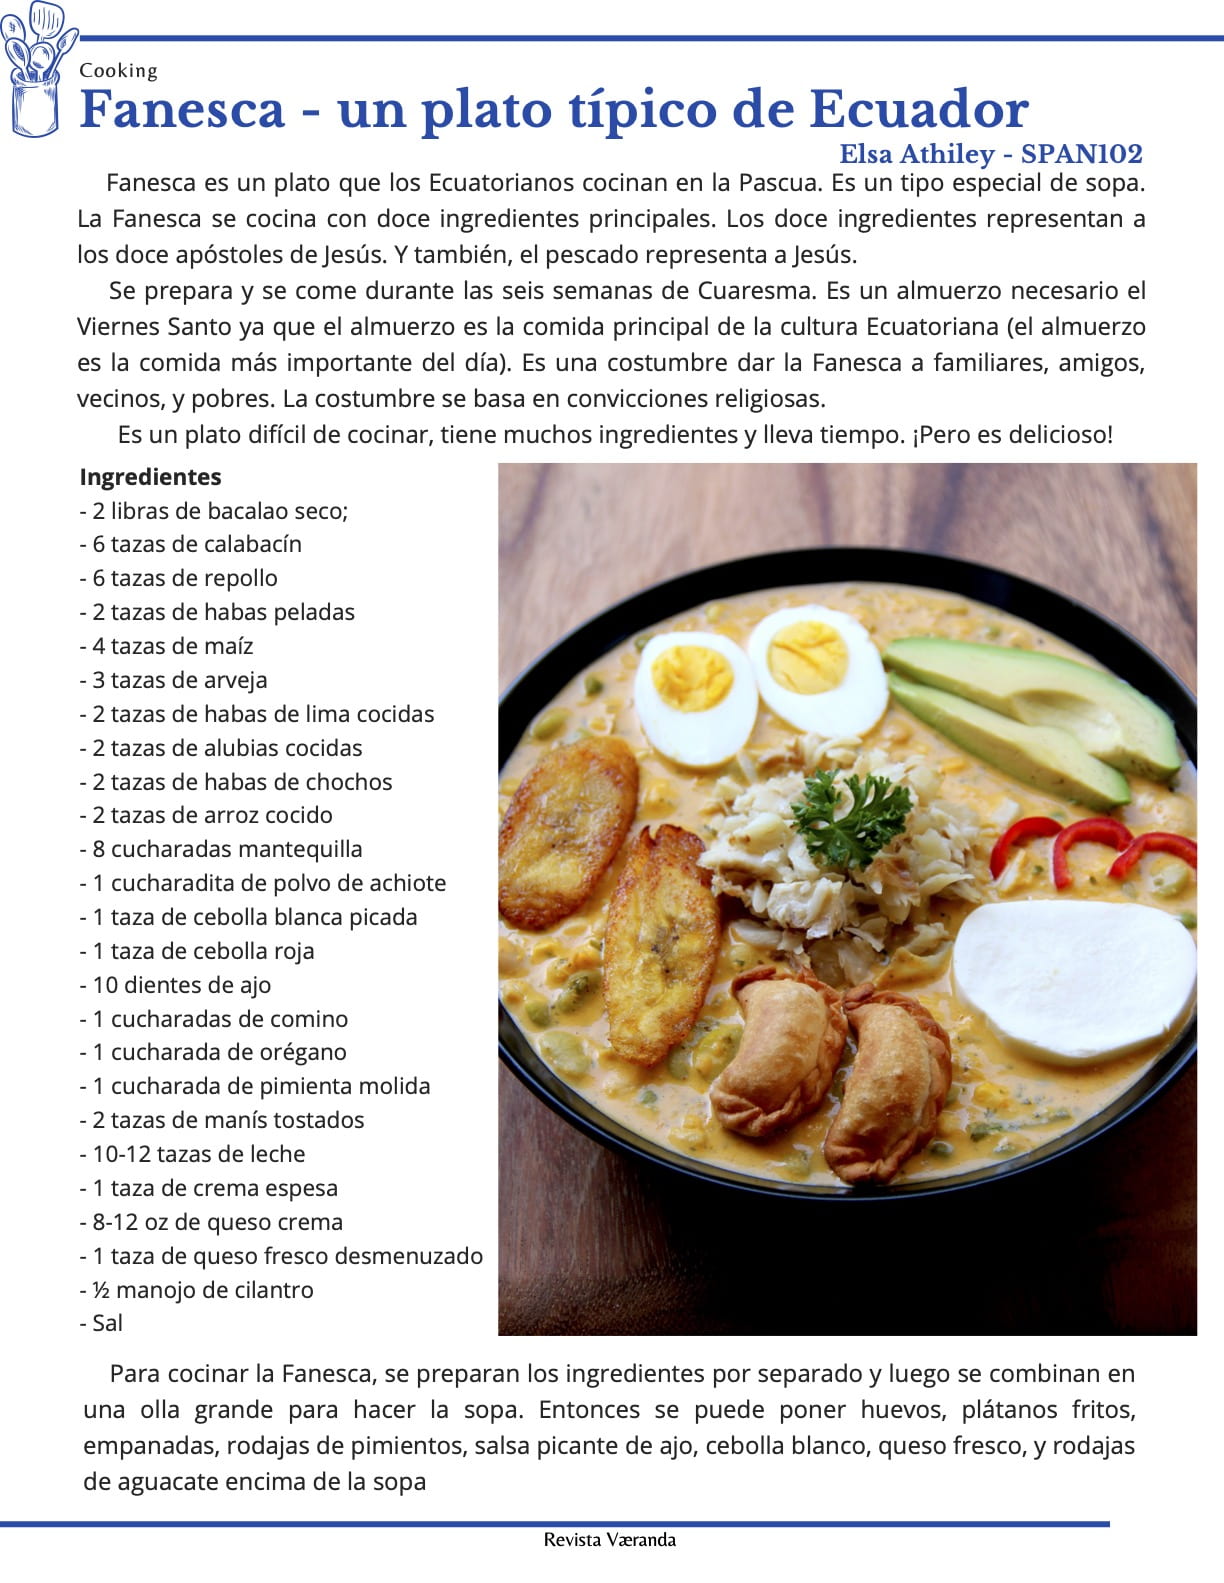 Fanesca Recipe by student Elsa Athiley